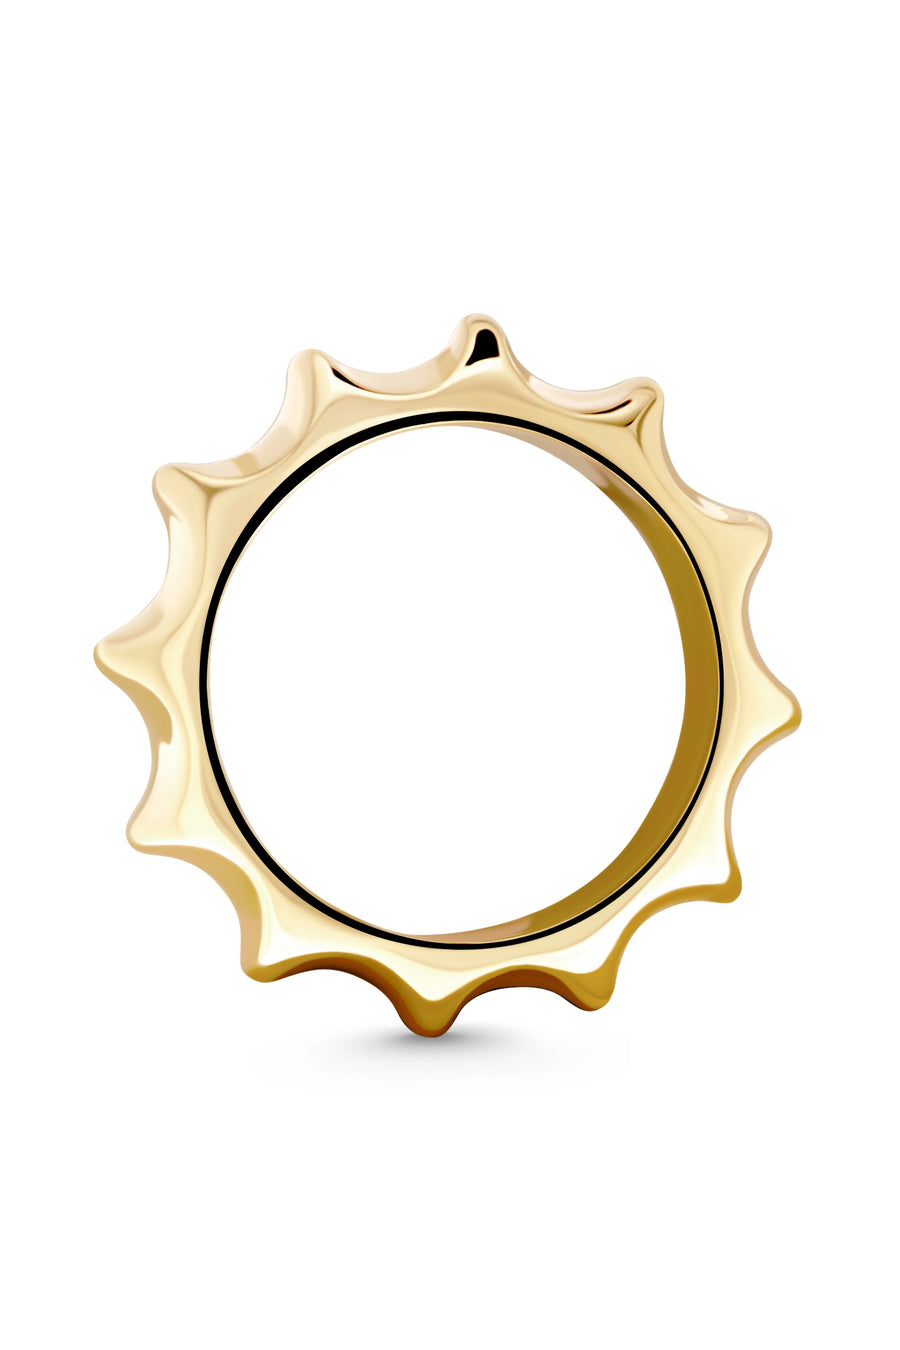 GALAXY Ring. Radial-shaped ring, 18K gold vermeil, size US7, handmade, hypoallergenic, water-resistant